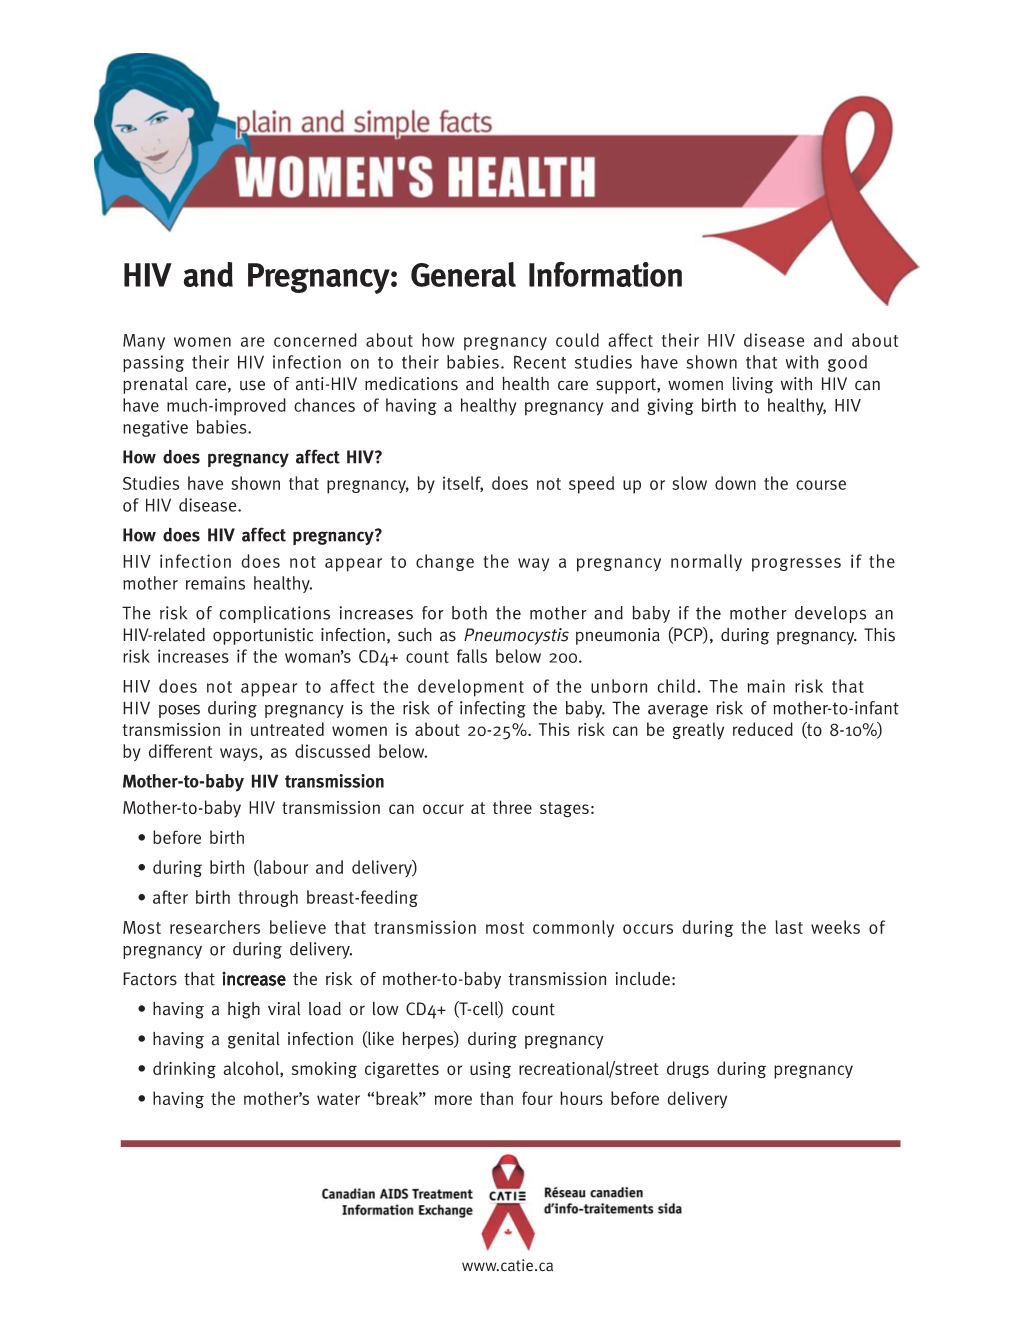 HIV and Pregnancy: General Information